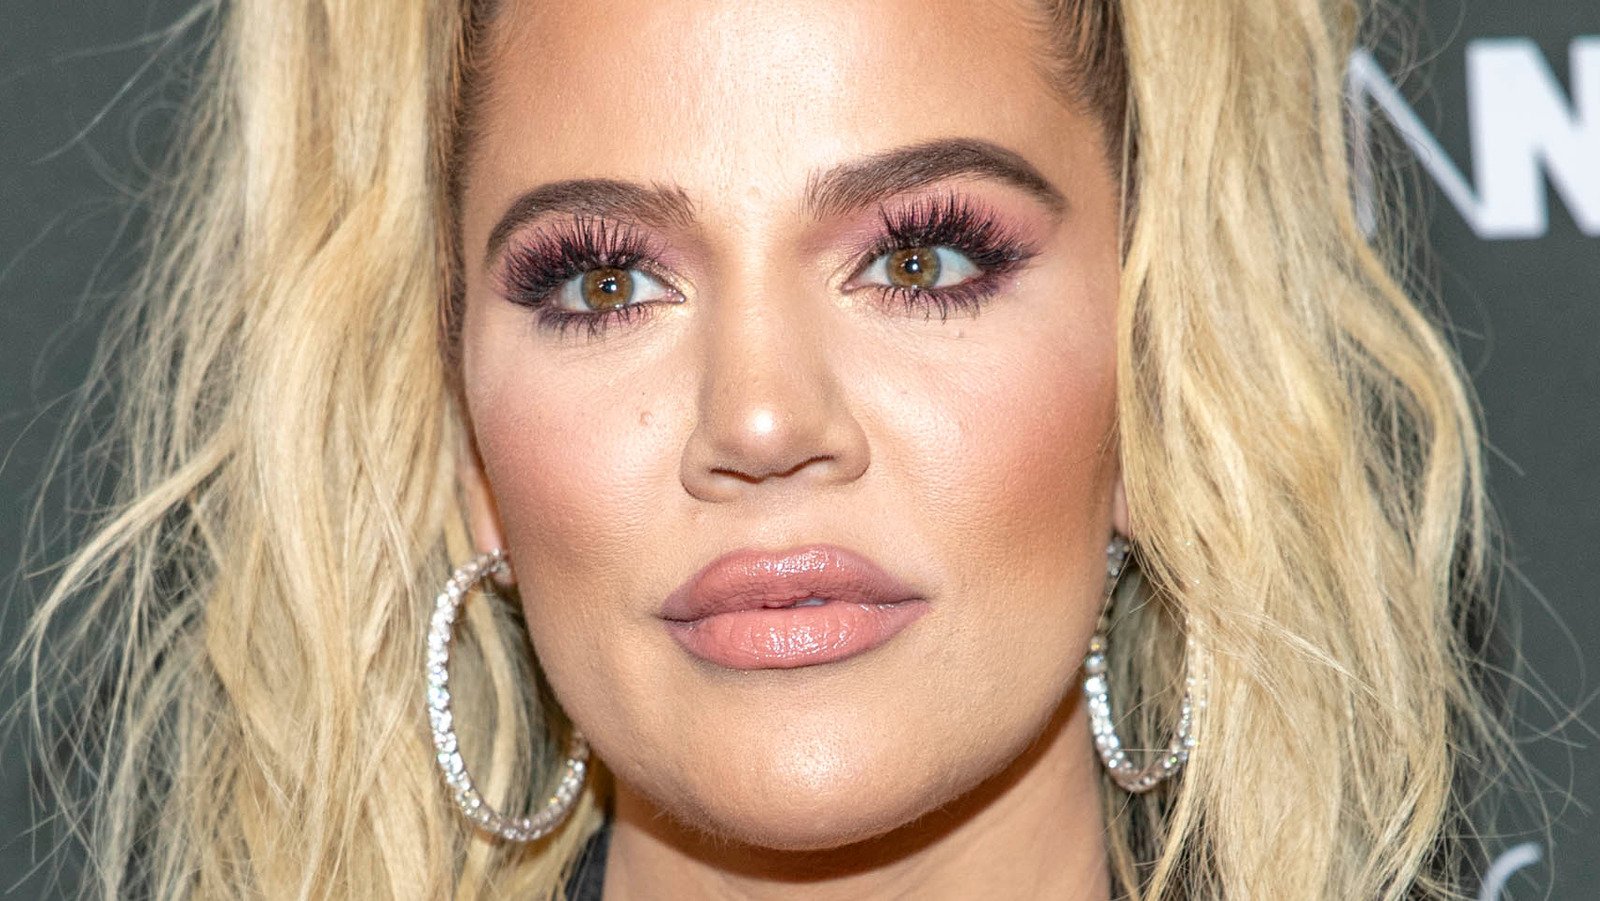 Fans Are Absolutely Fuming Over Khloe Kardashian Selling True's Used Clothes - Nicki Swift